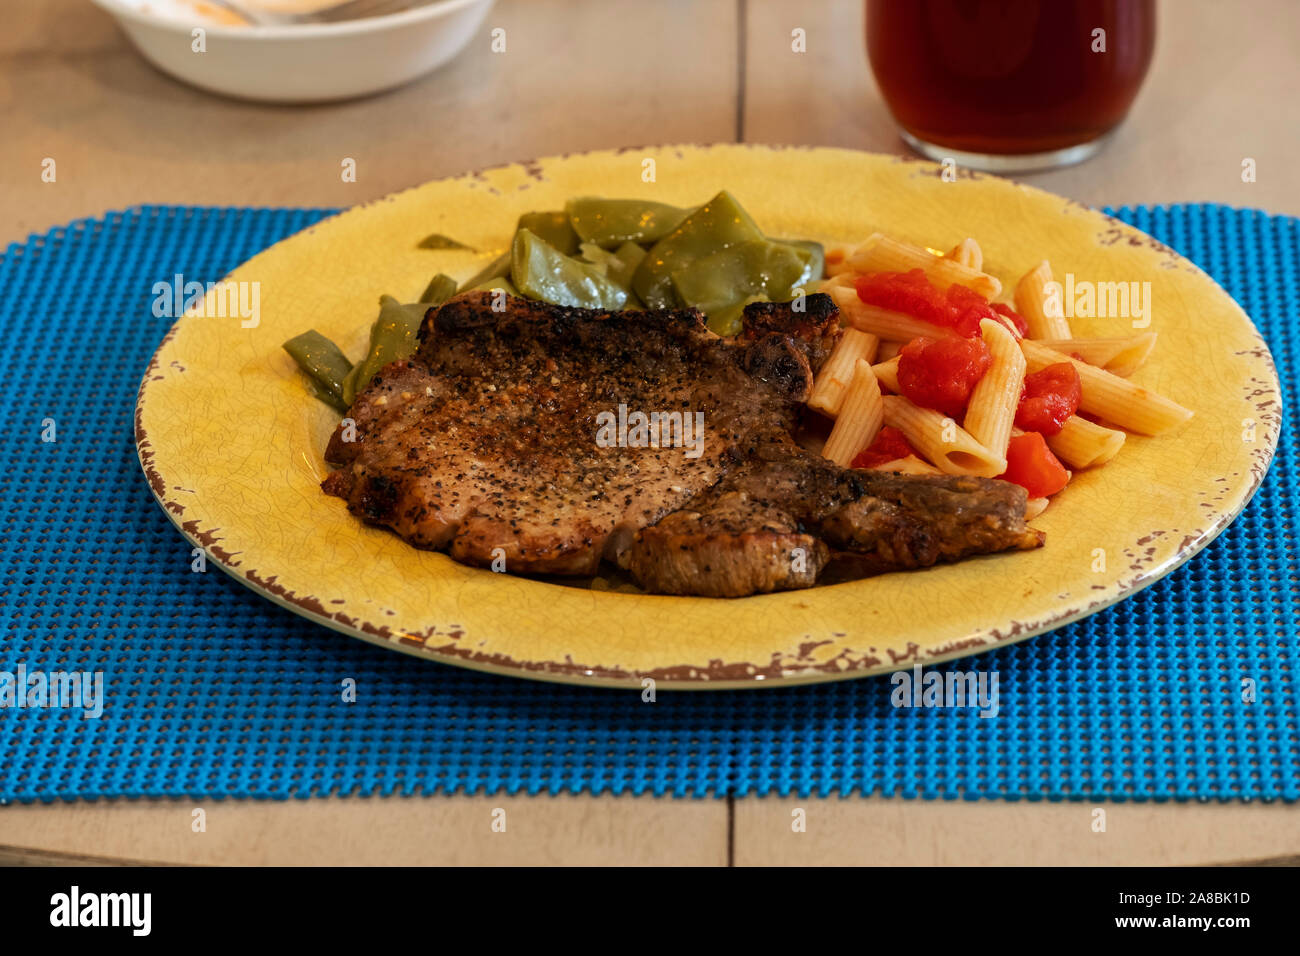 A grilled pork chop dinner with penne pasta and tomatoes, Italian green beans on a yellow plate. USA. Stock Photo